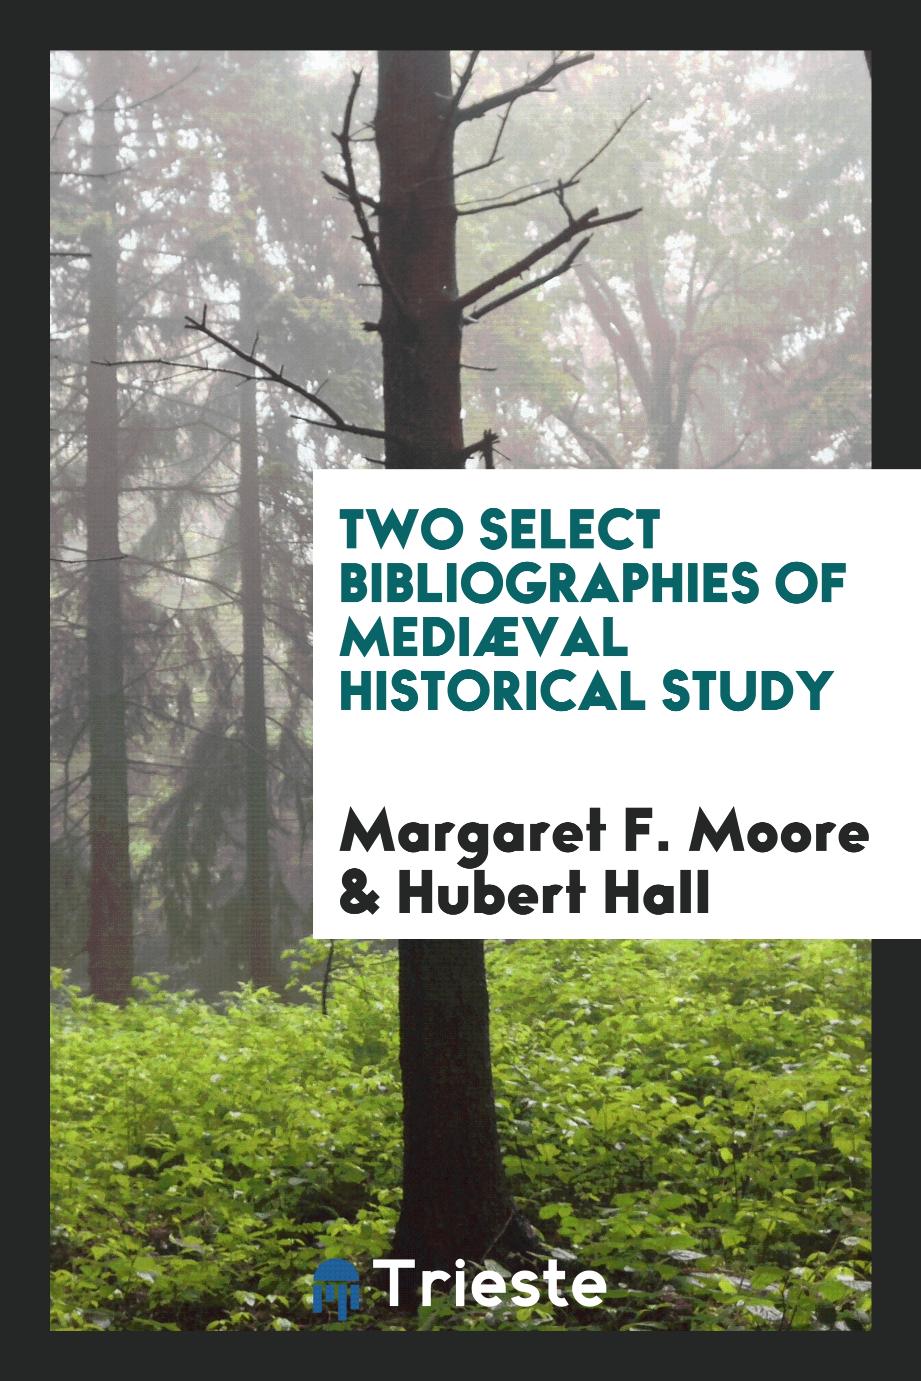 Two select bibliographies of mediæval historical study